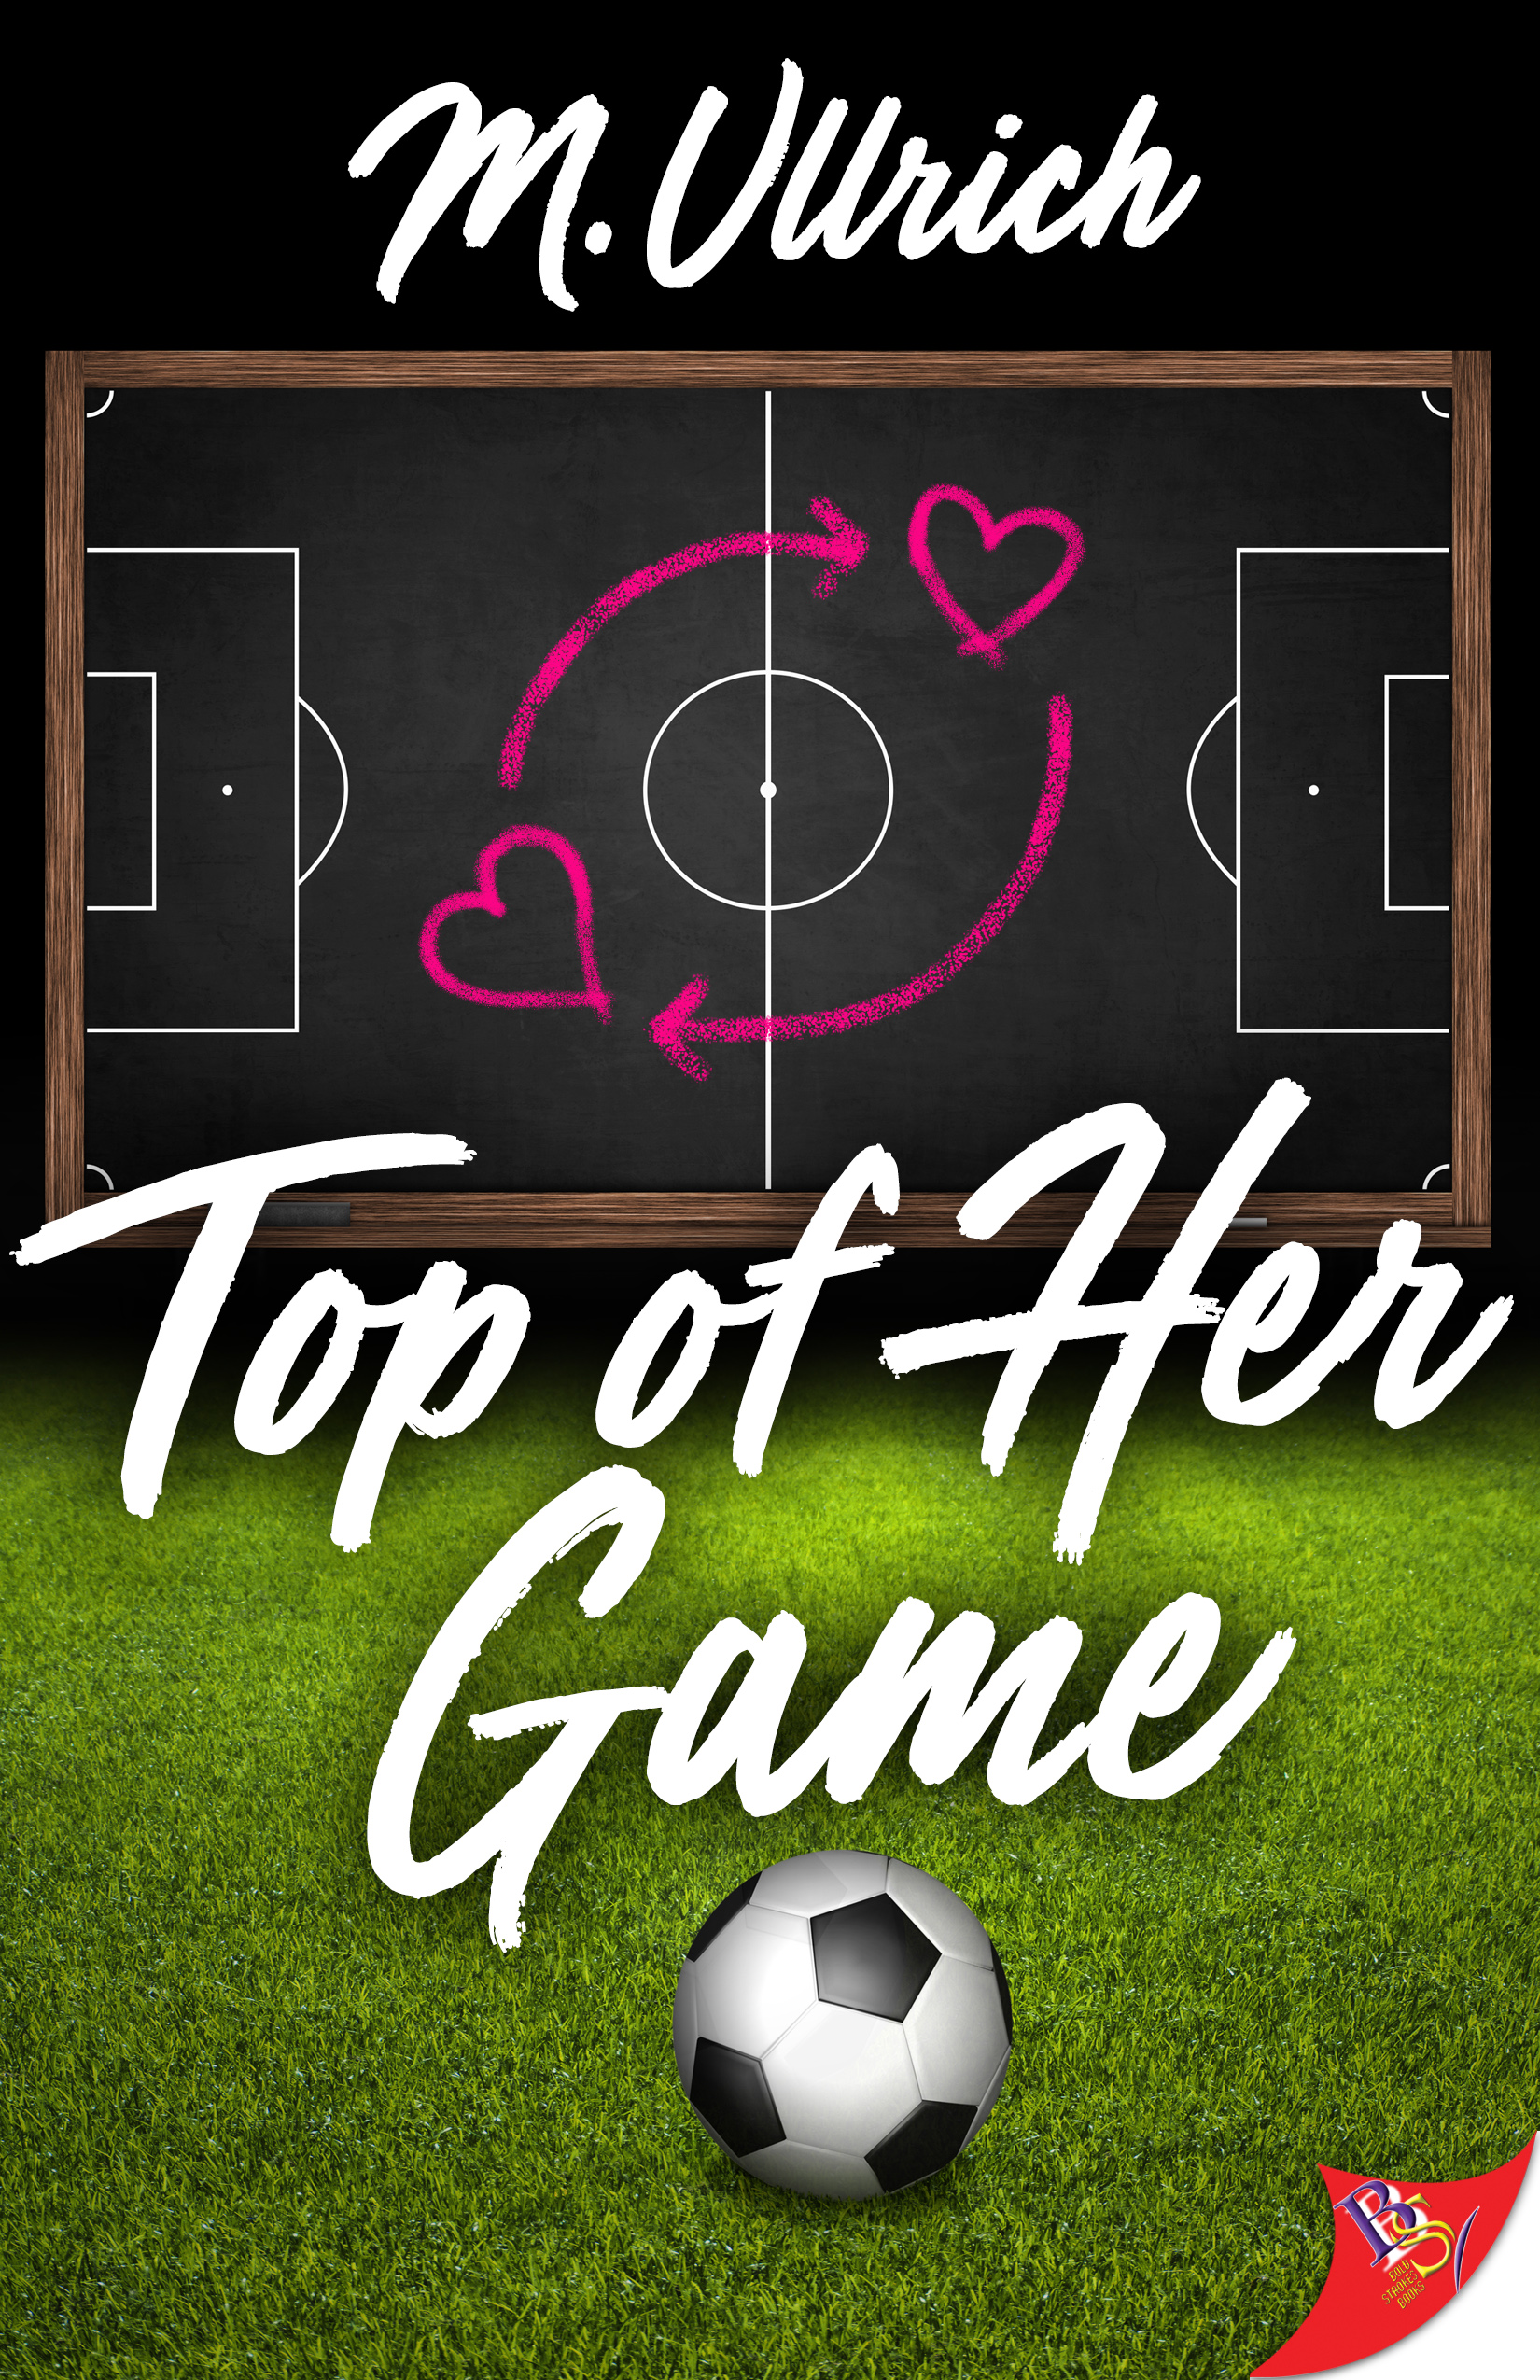 download free you and me and her game